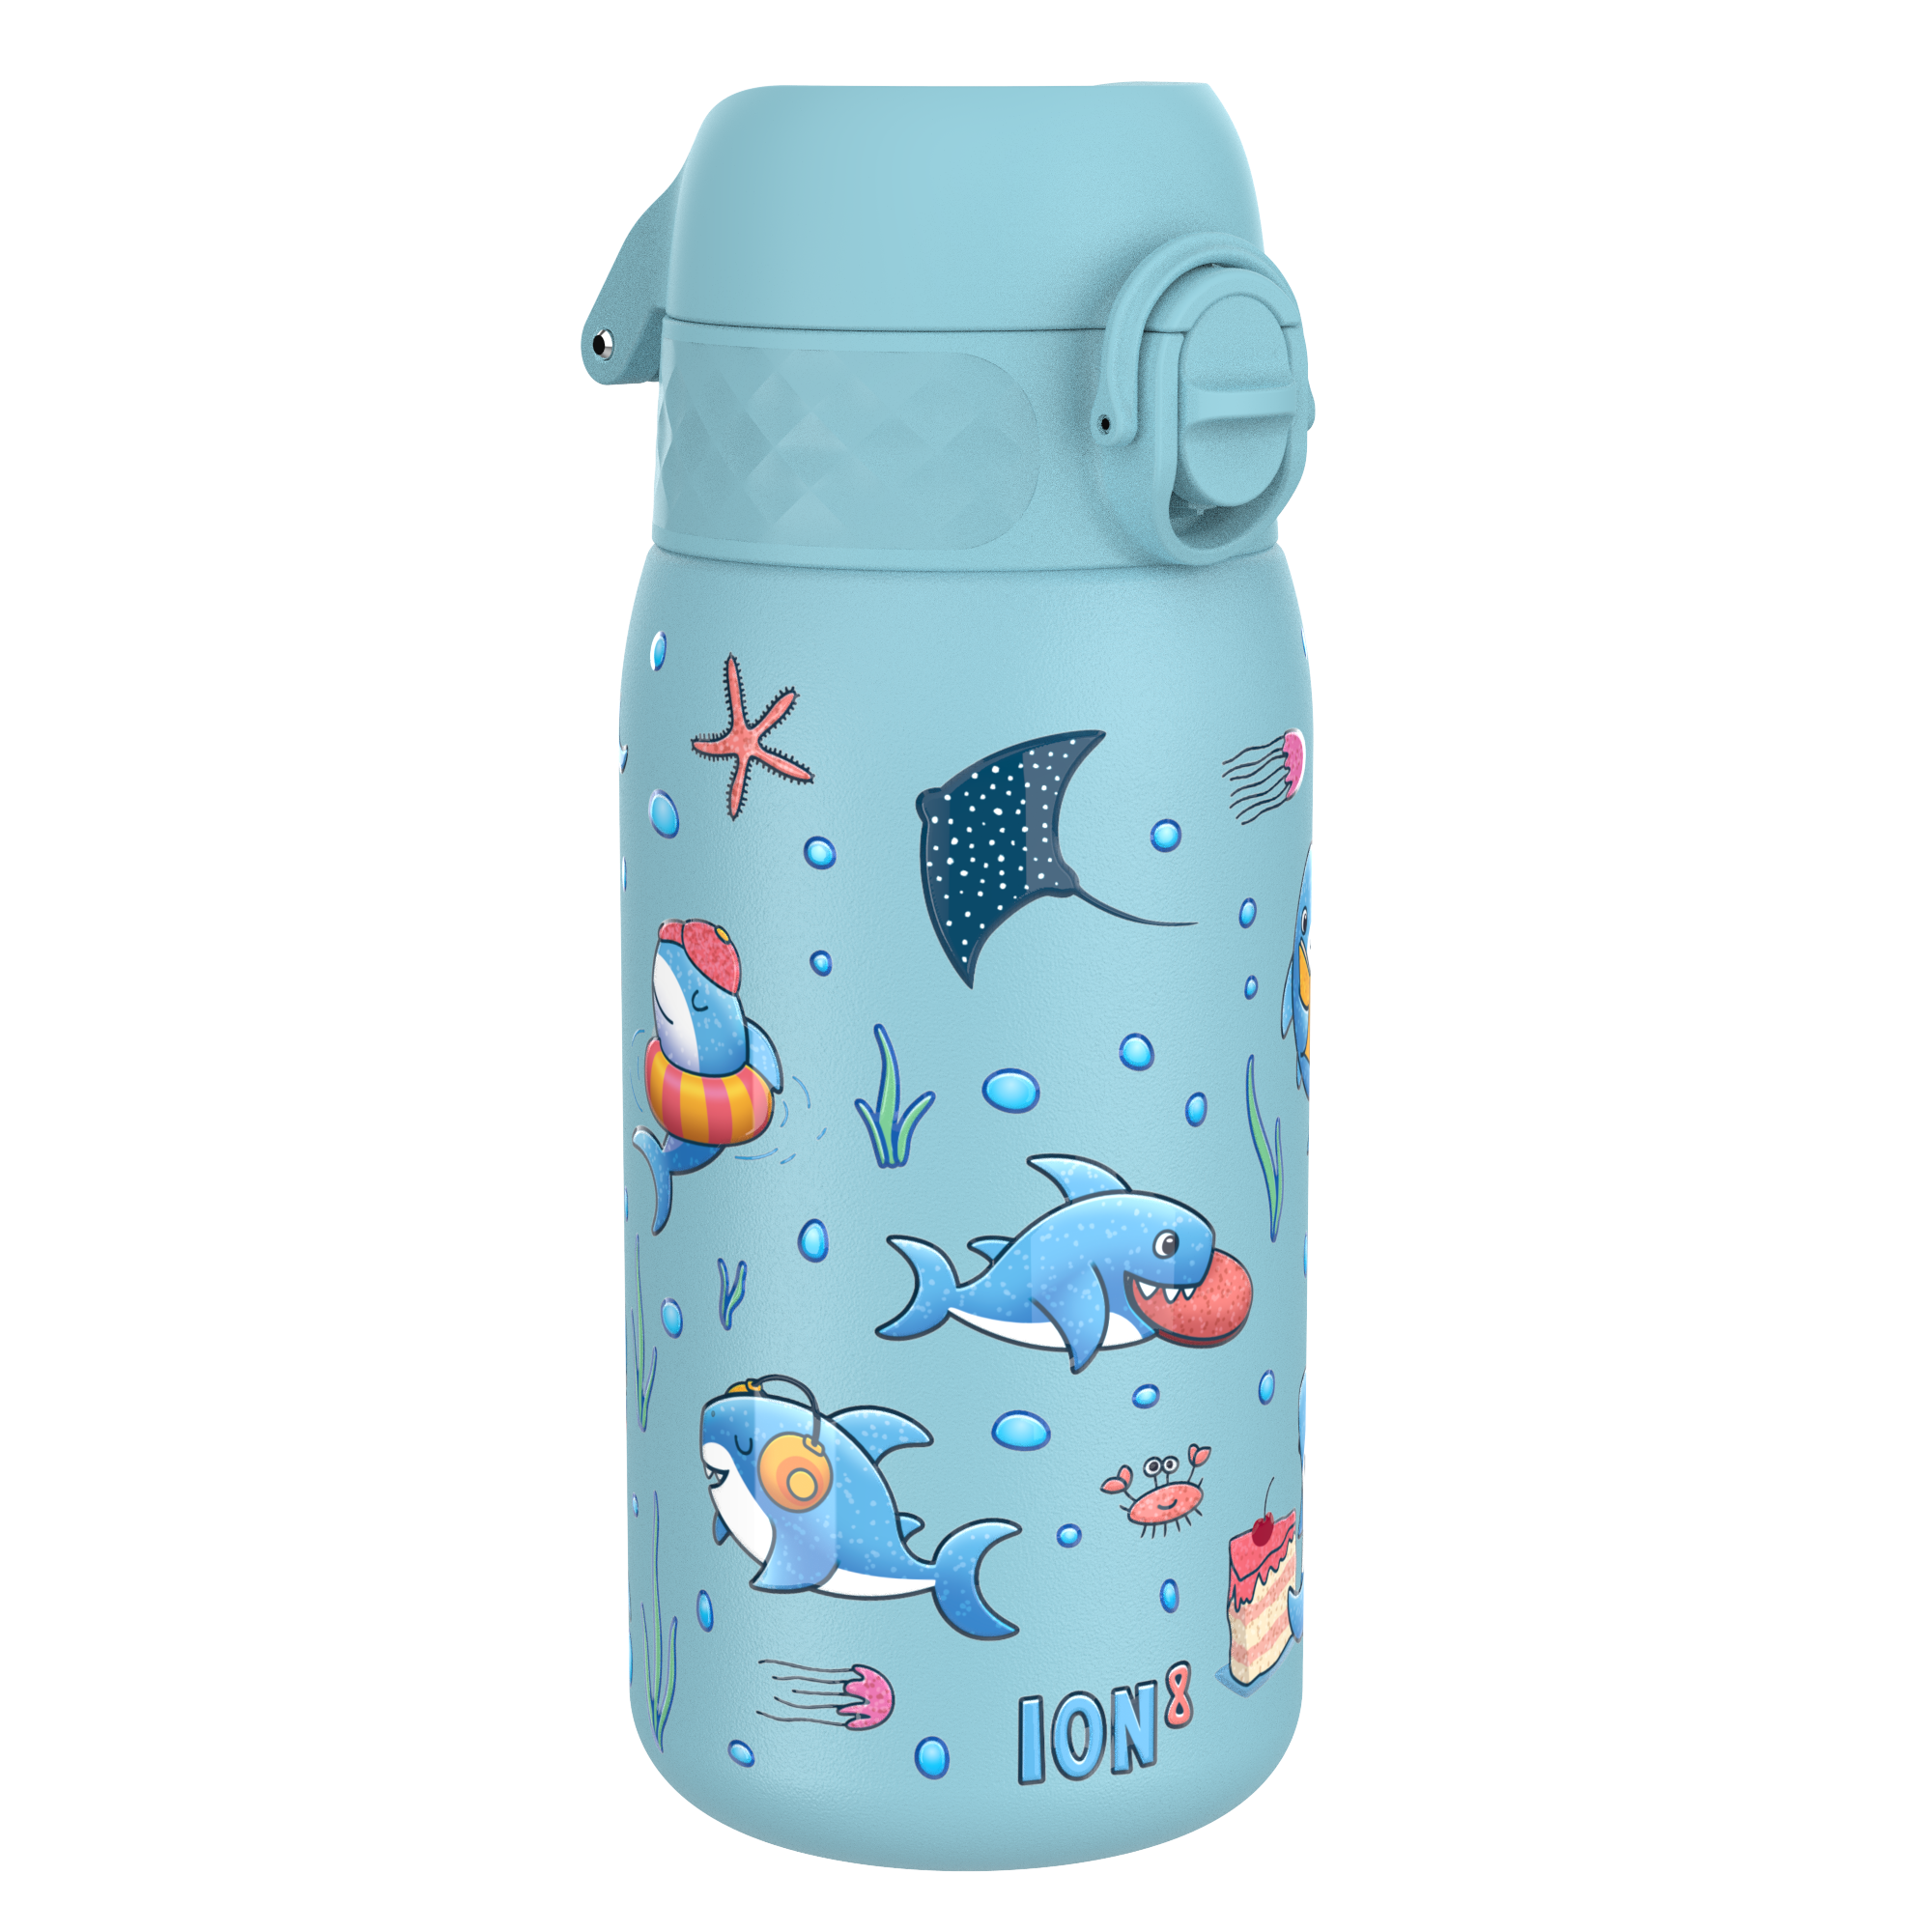 ION8 ion8 Kinderwaterfles roestvrij staal 400 ml lichtblauw